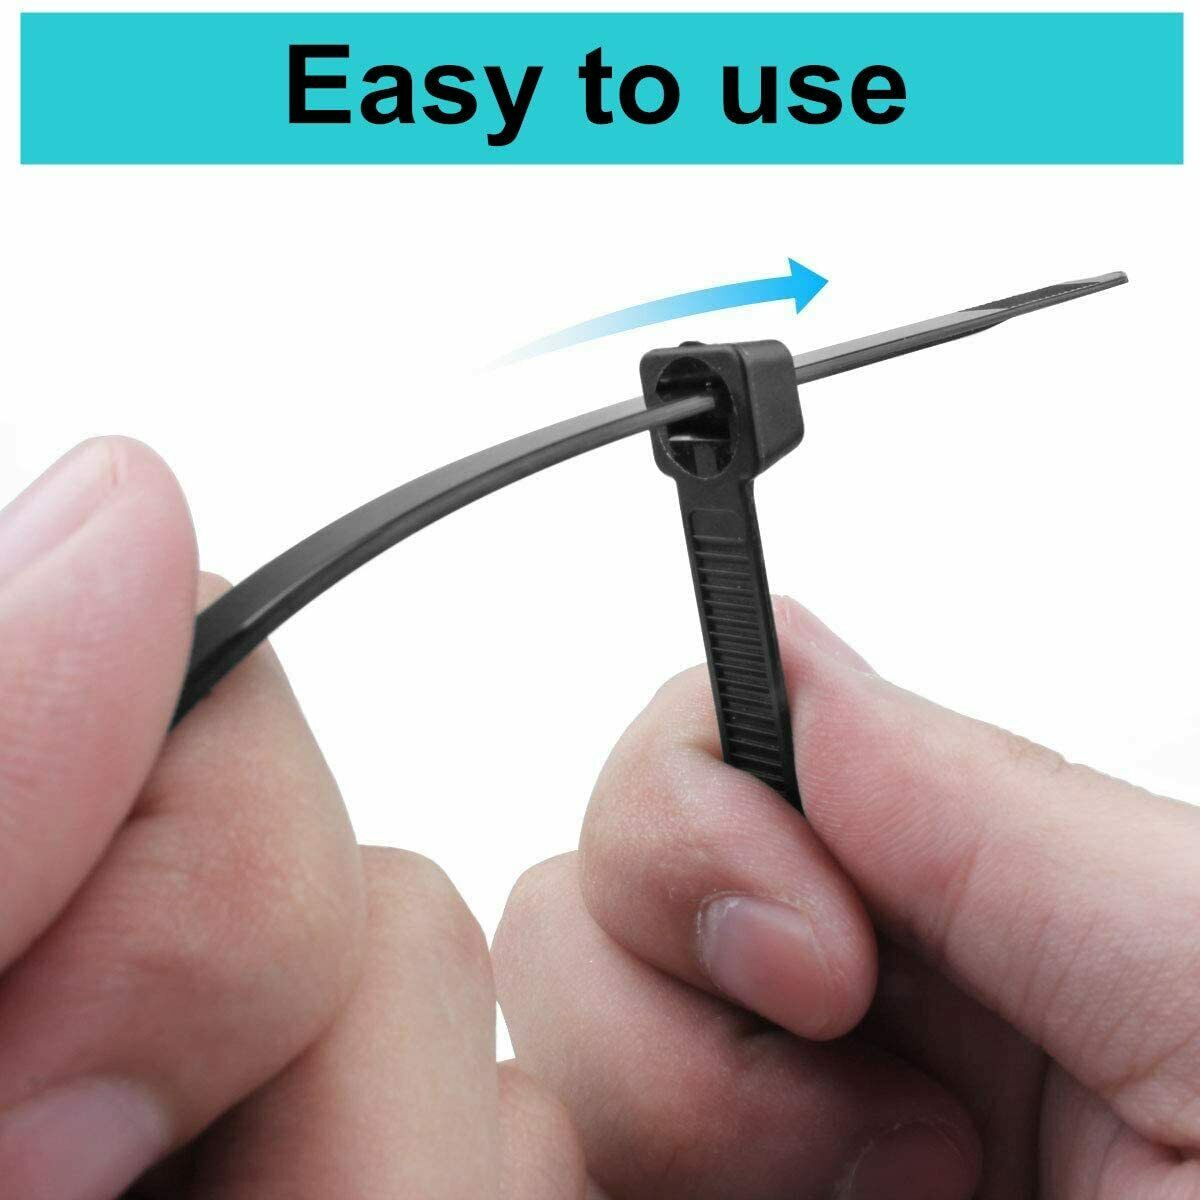 100 Cable Zip Ties 12-inch Long Cable Ties Super Strong Nylon Cord Wrap Black - InspiredGrabs.com